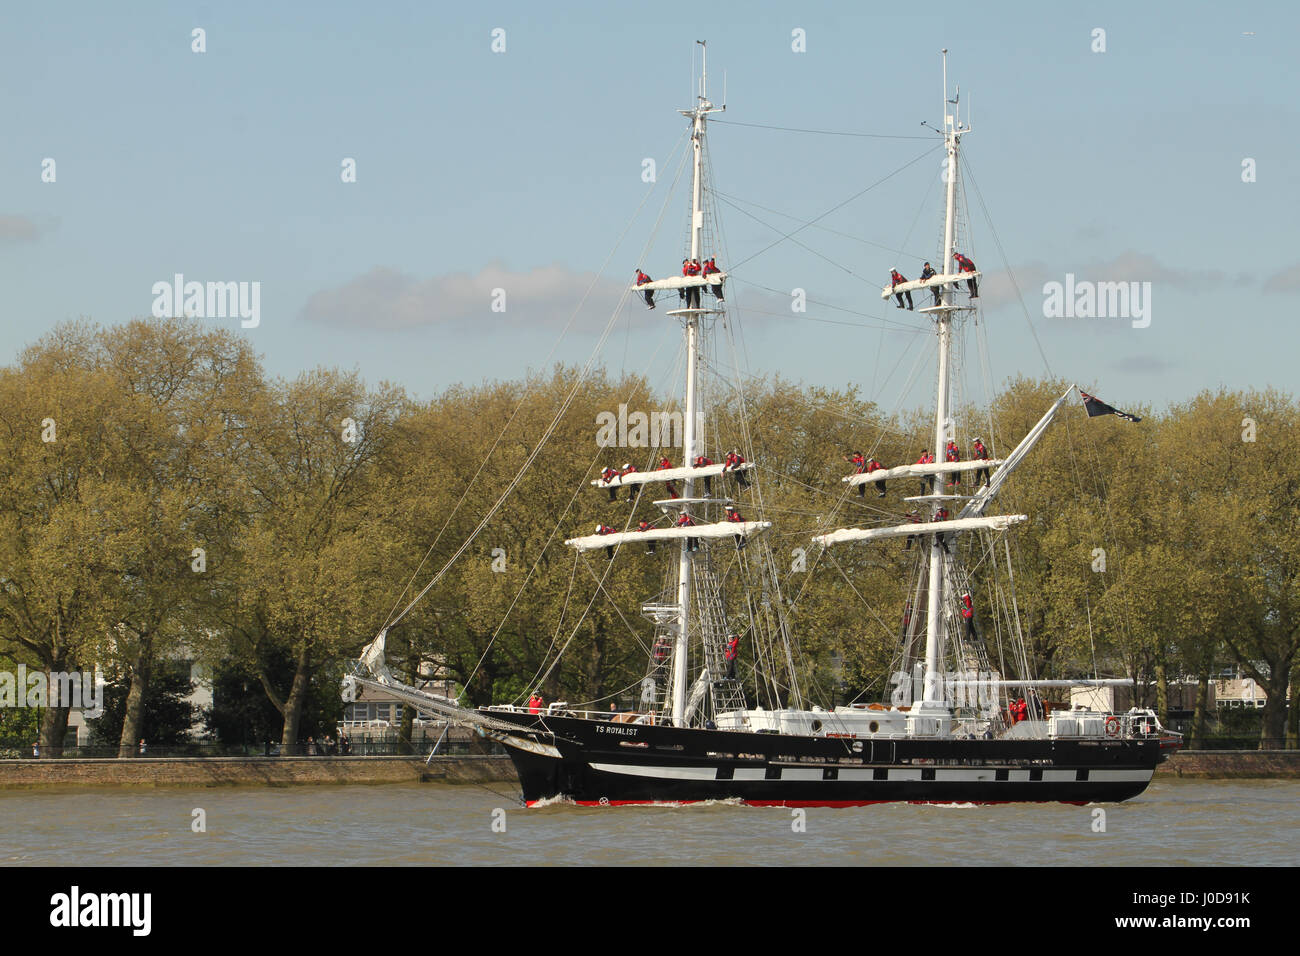 London, UK. 12th Apr, 2017. London, United Kingdom - April 12: The TS Royalist sails at Greenwich ahead of the 2017 Regatta, where around 40 Tall Ships are scheduled to sail the river Thames to Greenwich, marking the 150th anniversary of the Canadian Confederation. Over the Easter weekend, on 13 to 16 April 2017, the ships will be anchored at the Maritime Greenwich UNESCO World Heritage Site in Greenwich town centre, and at the Royal Arsenal Riverside in Woolwich before they sail to Quebec, Canada, via Portugal, Bermuda and Boston. Credit: David Mbiyu/Alamy Live News Stock Photo